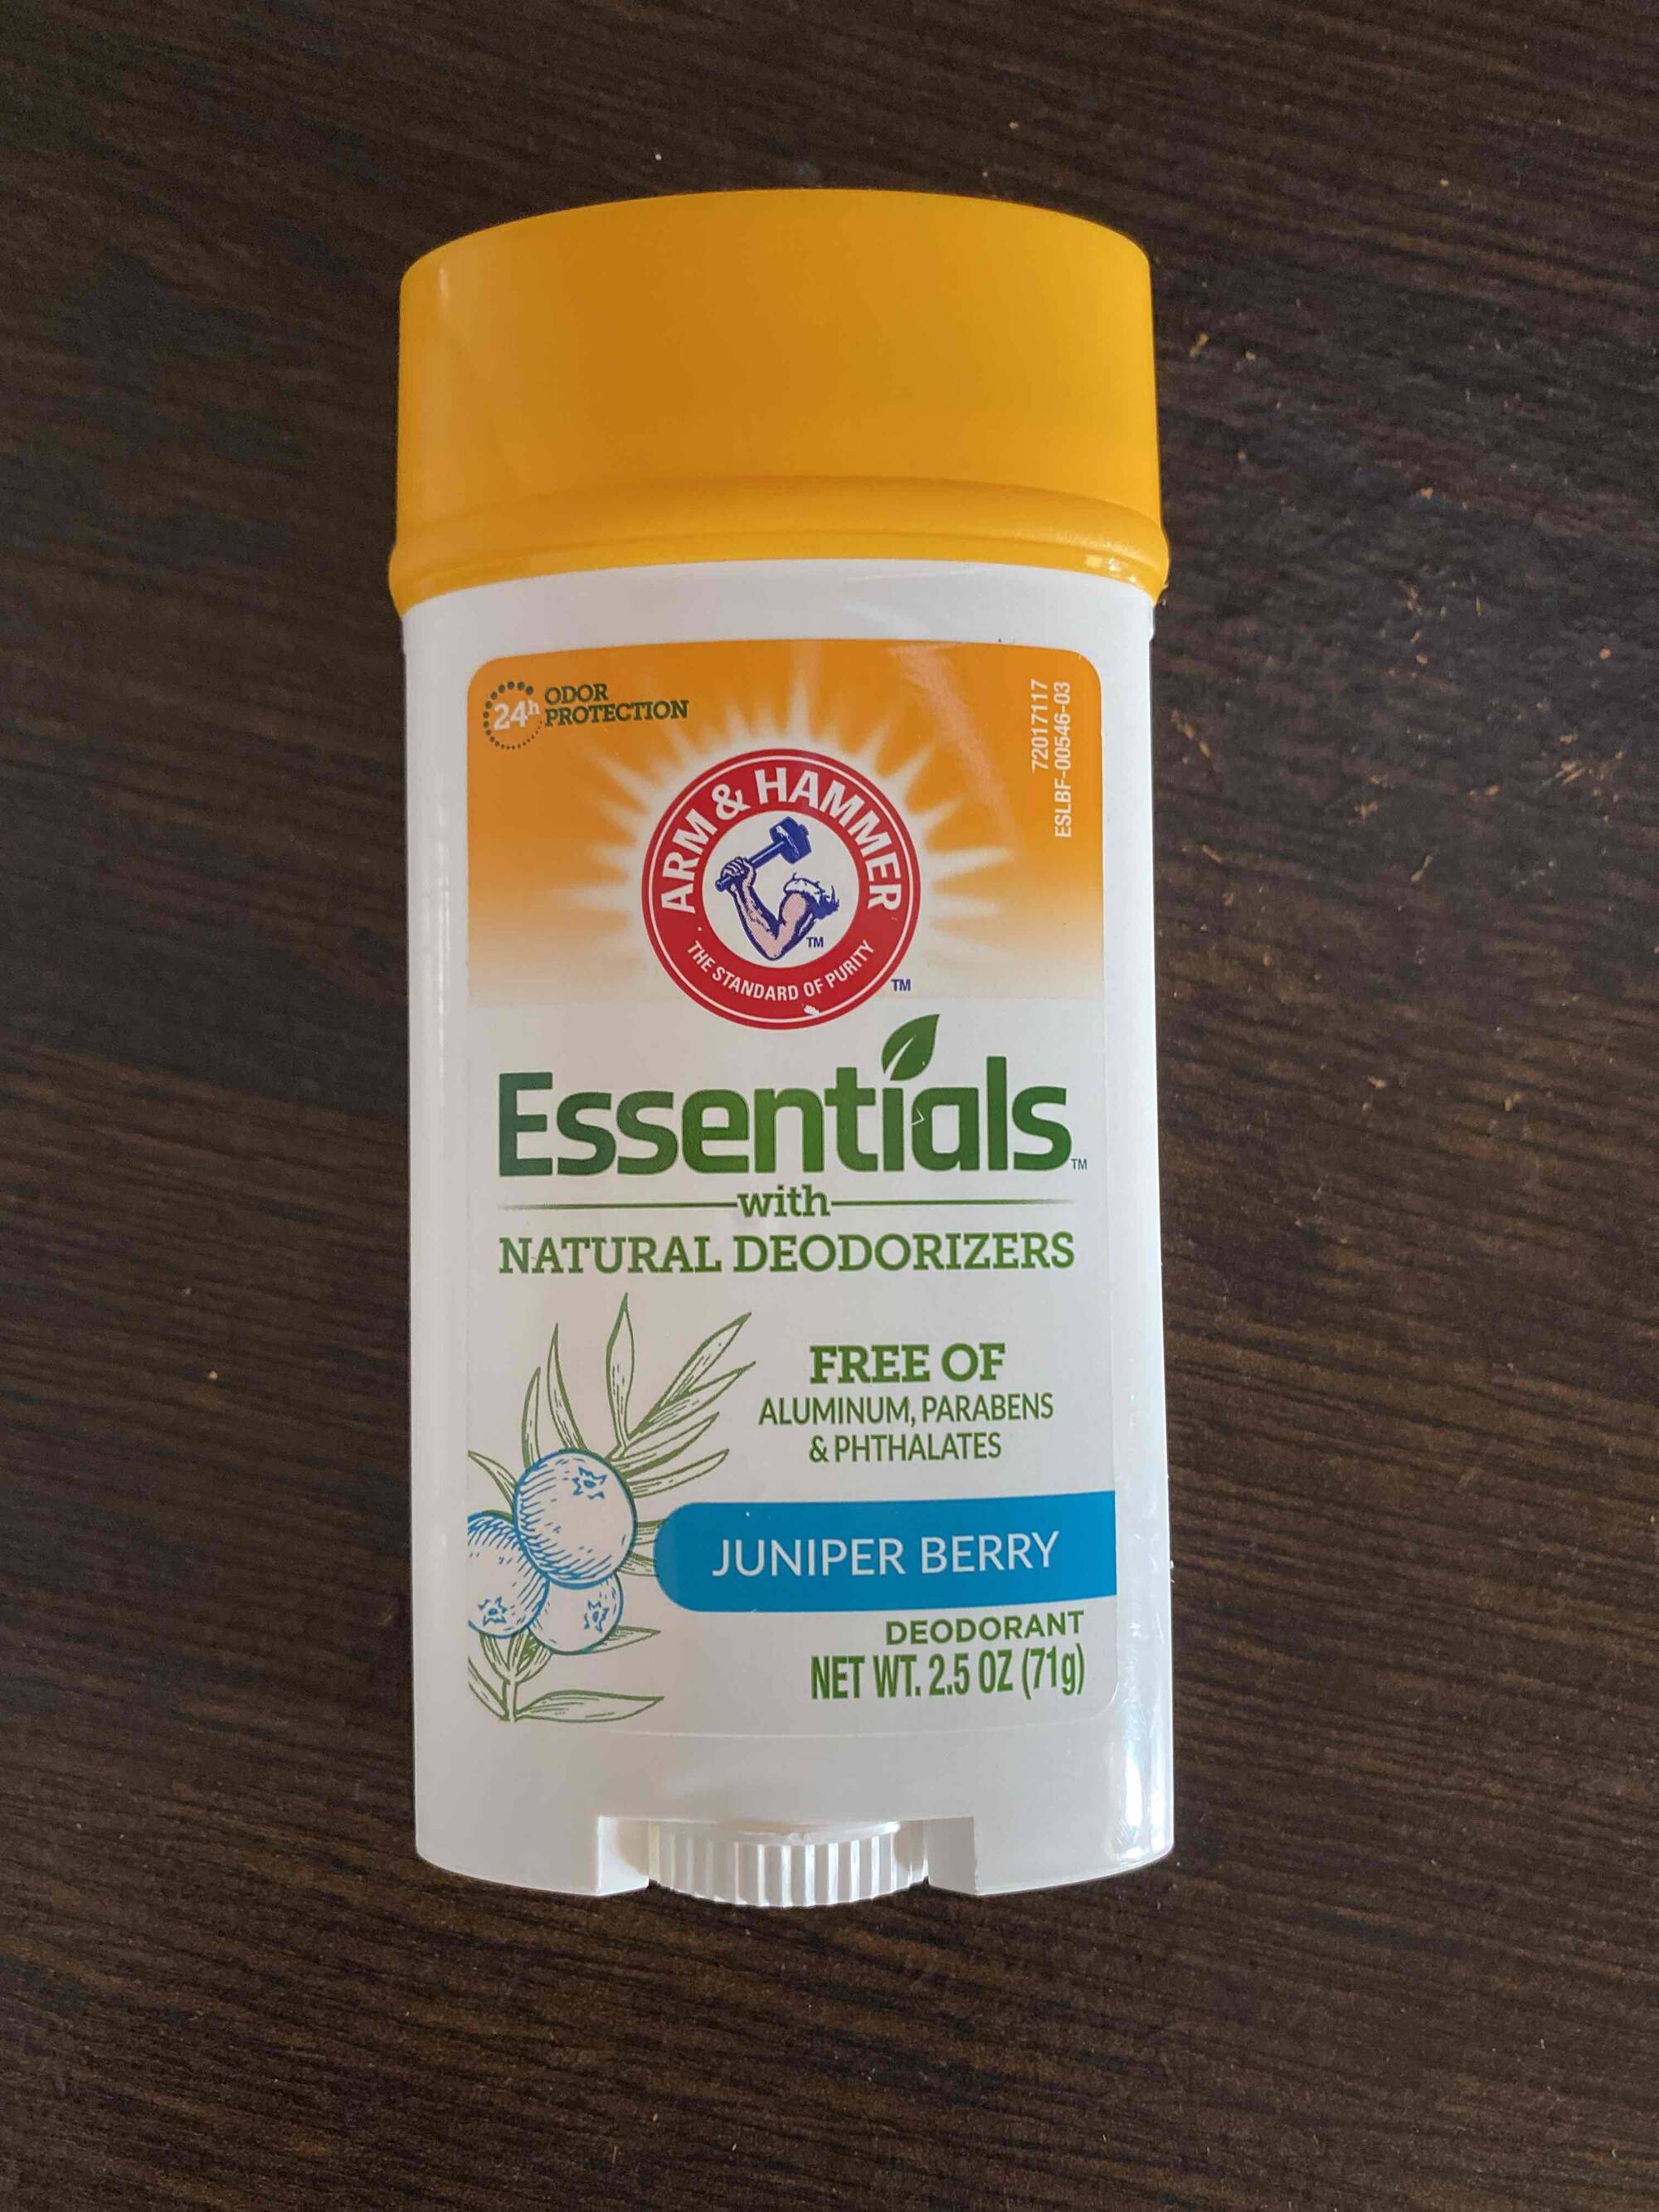 ARM & HAMMER - Essentials with natural deodorizers